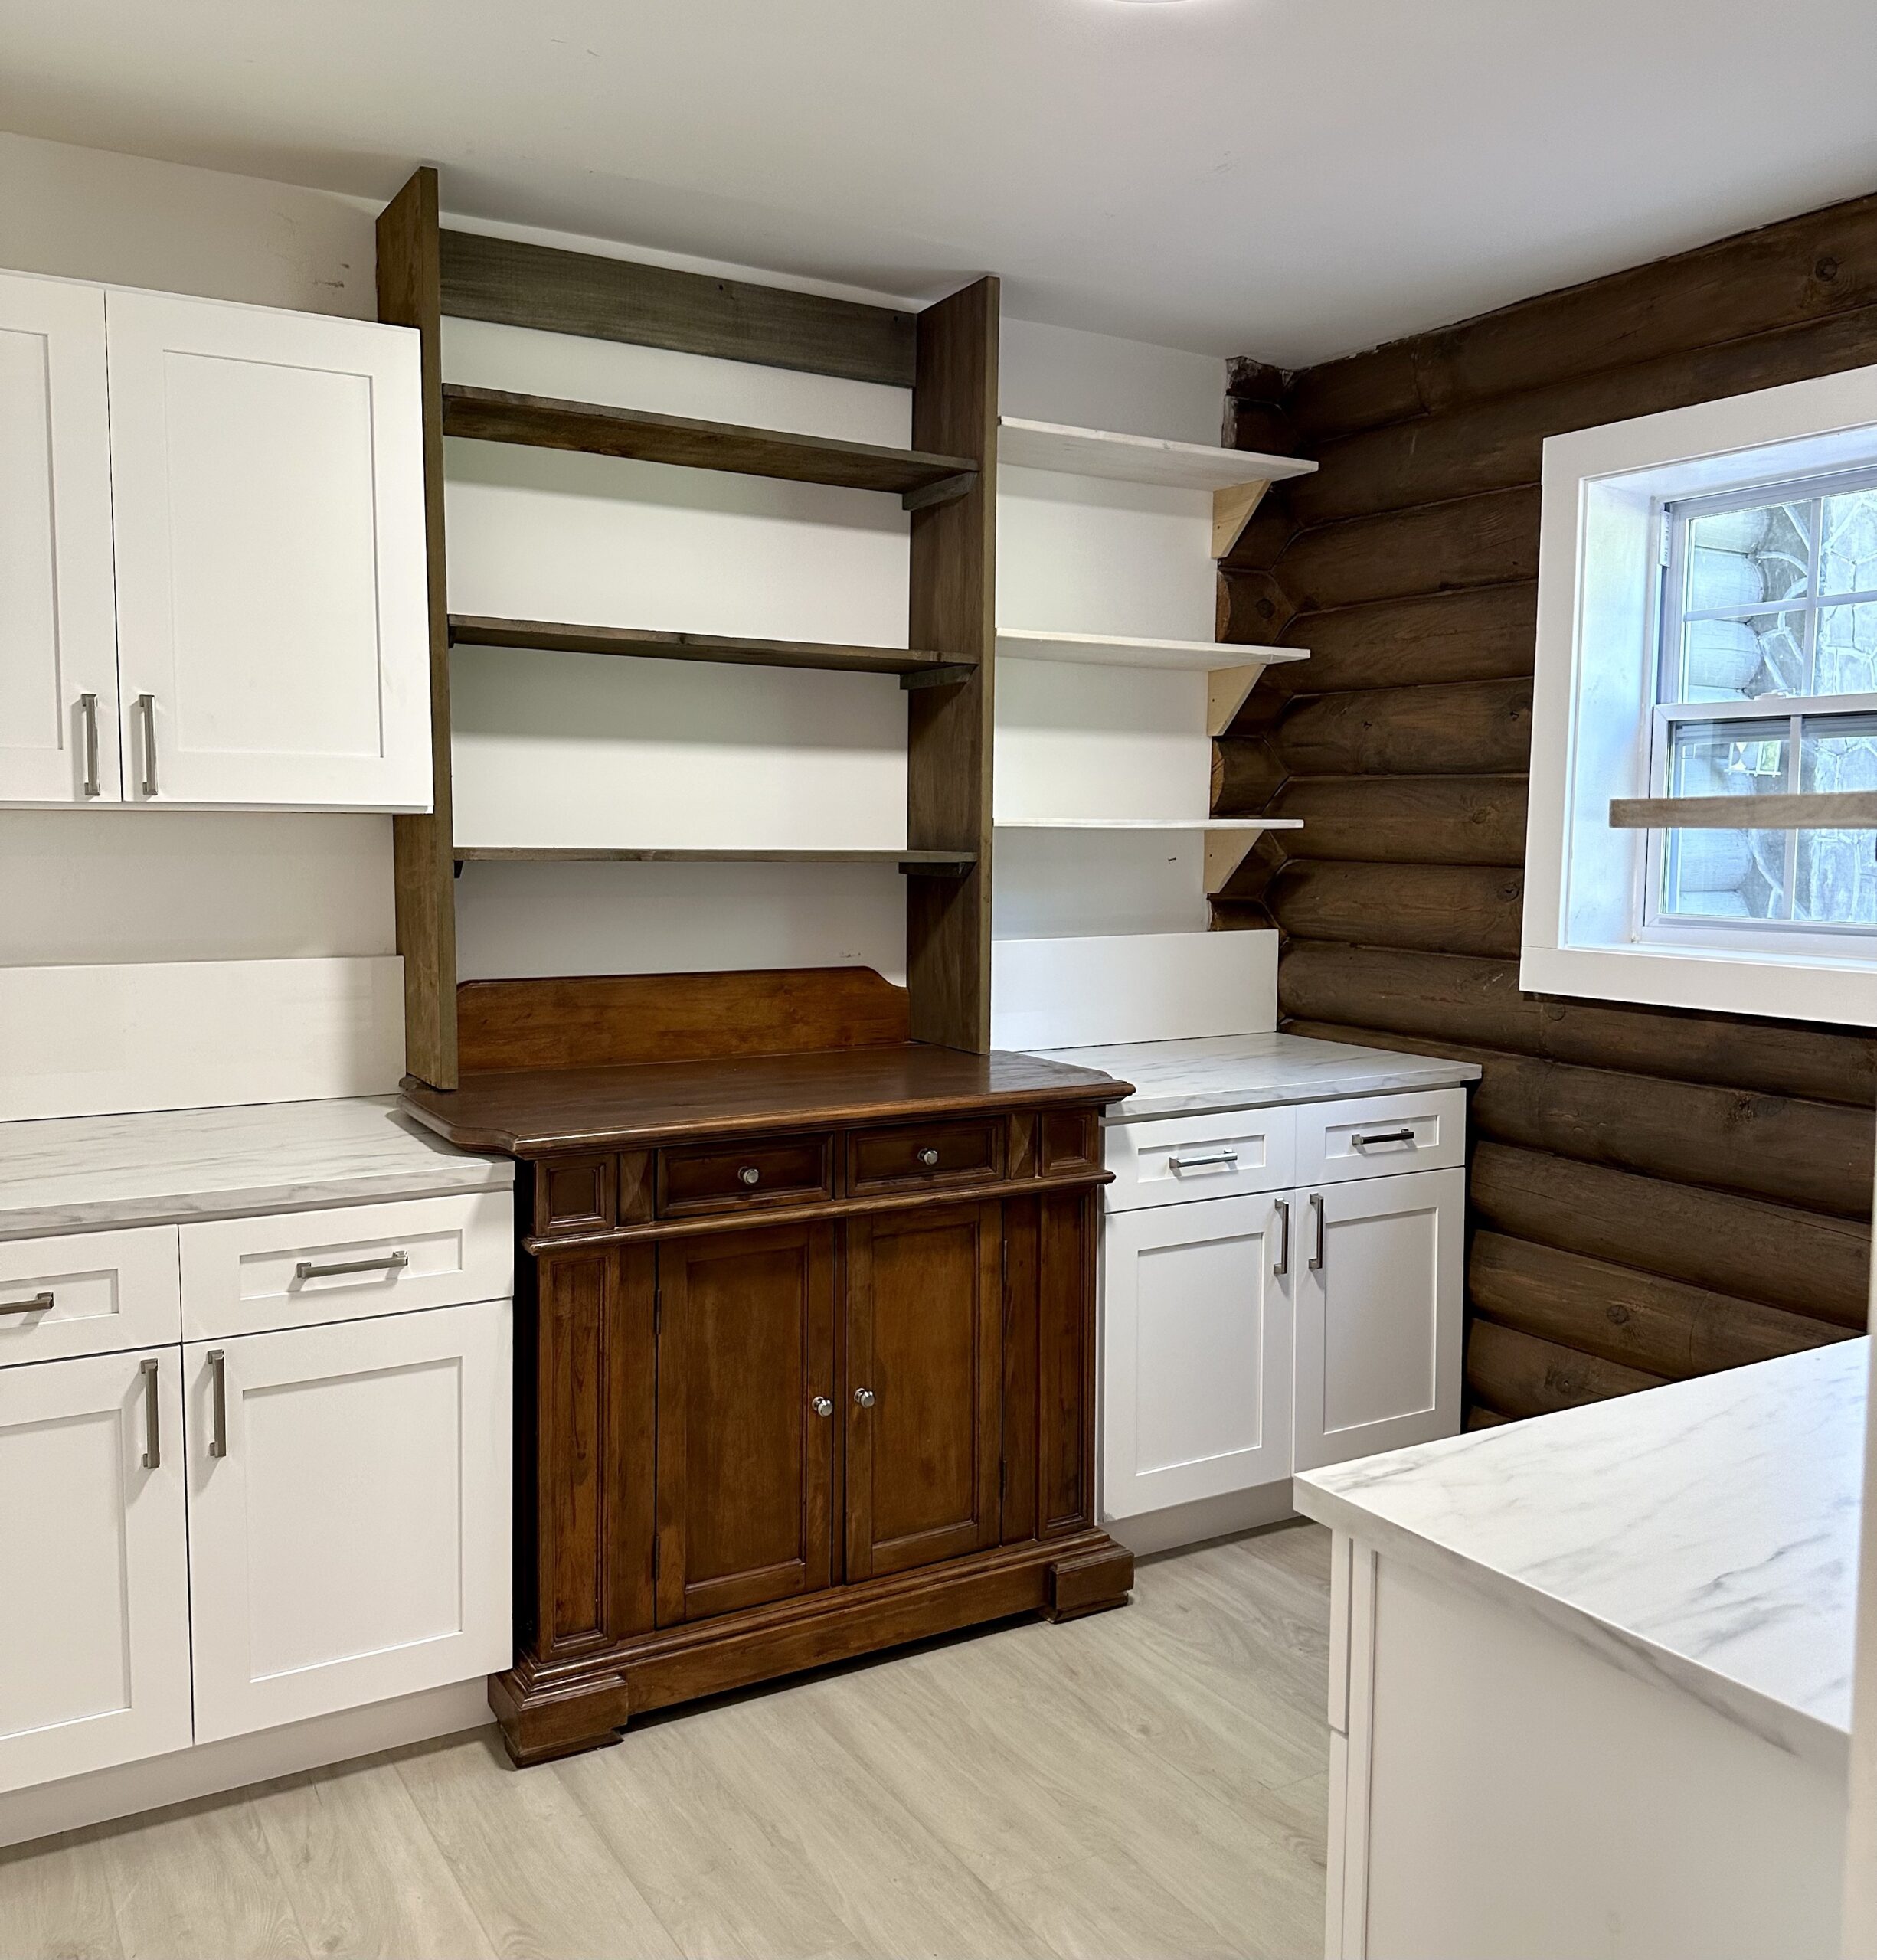 Vintage wooden cabinet incorporated into a modern butlers pantry.